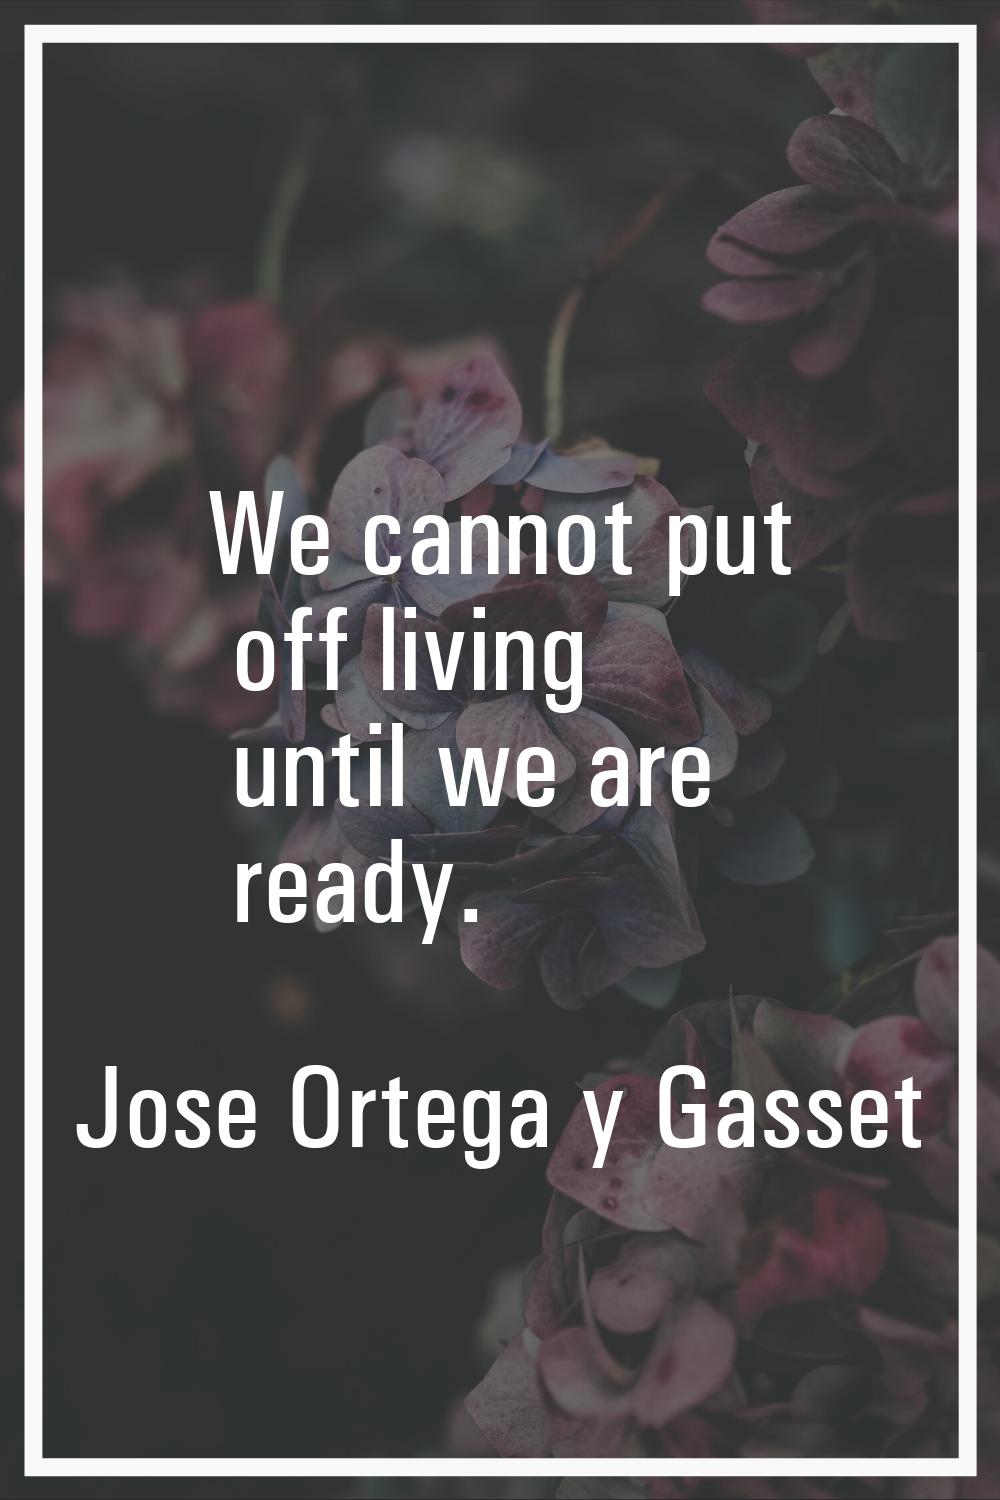 We cannot put off living until we are ready.